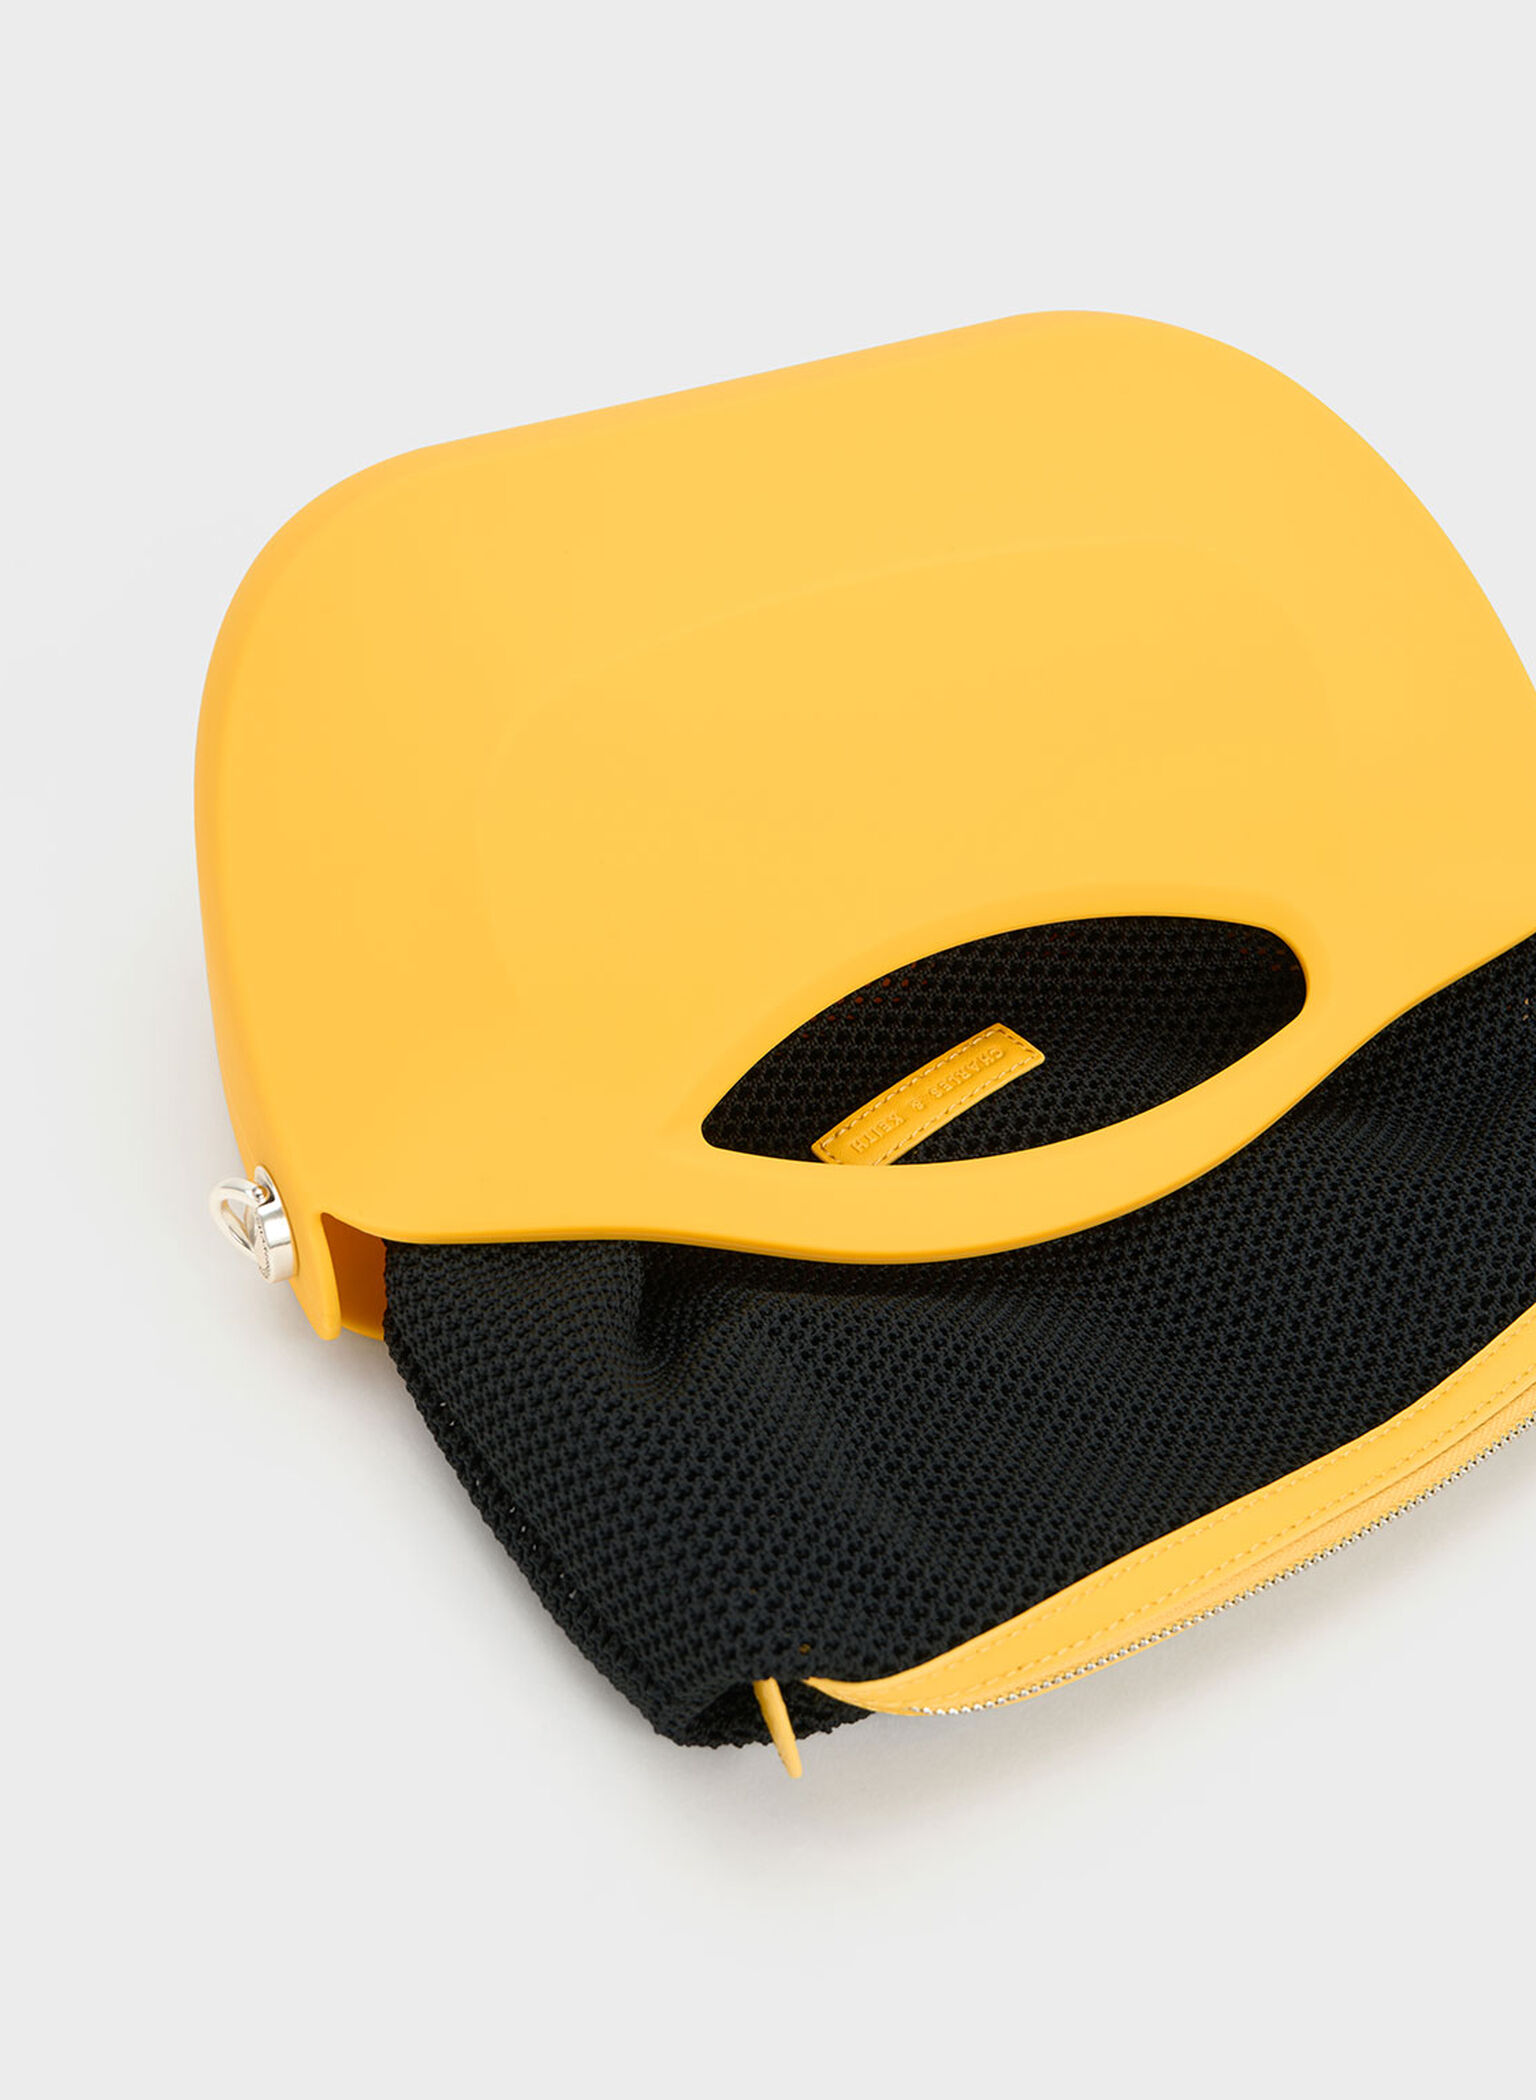 Cocoon Curved Handle Bag, Yellow, hi-res